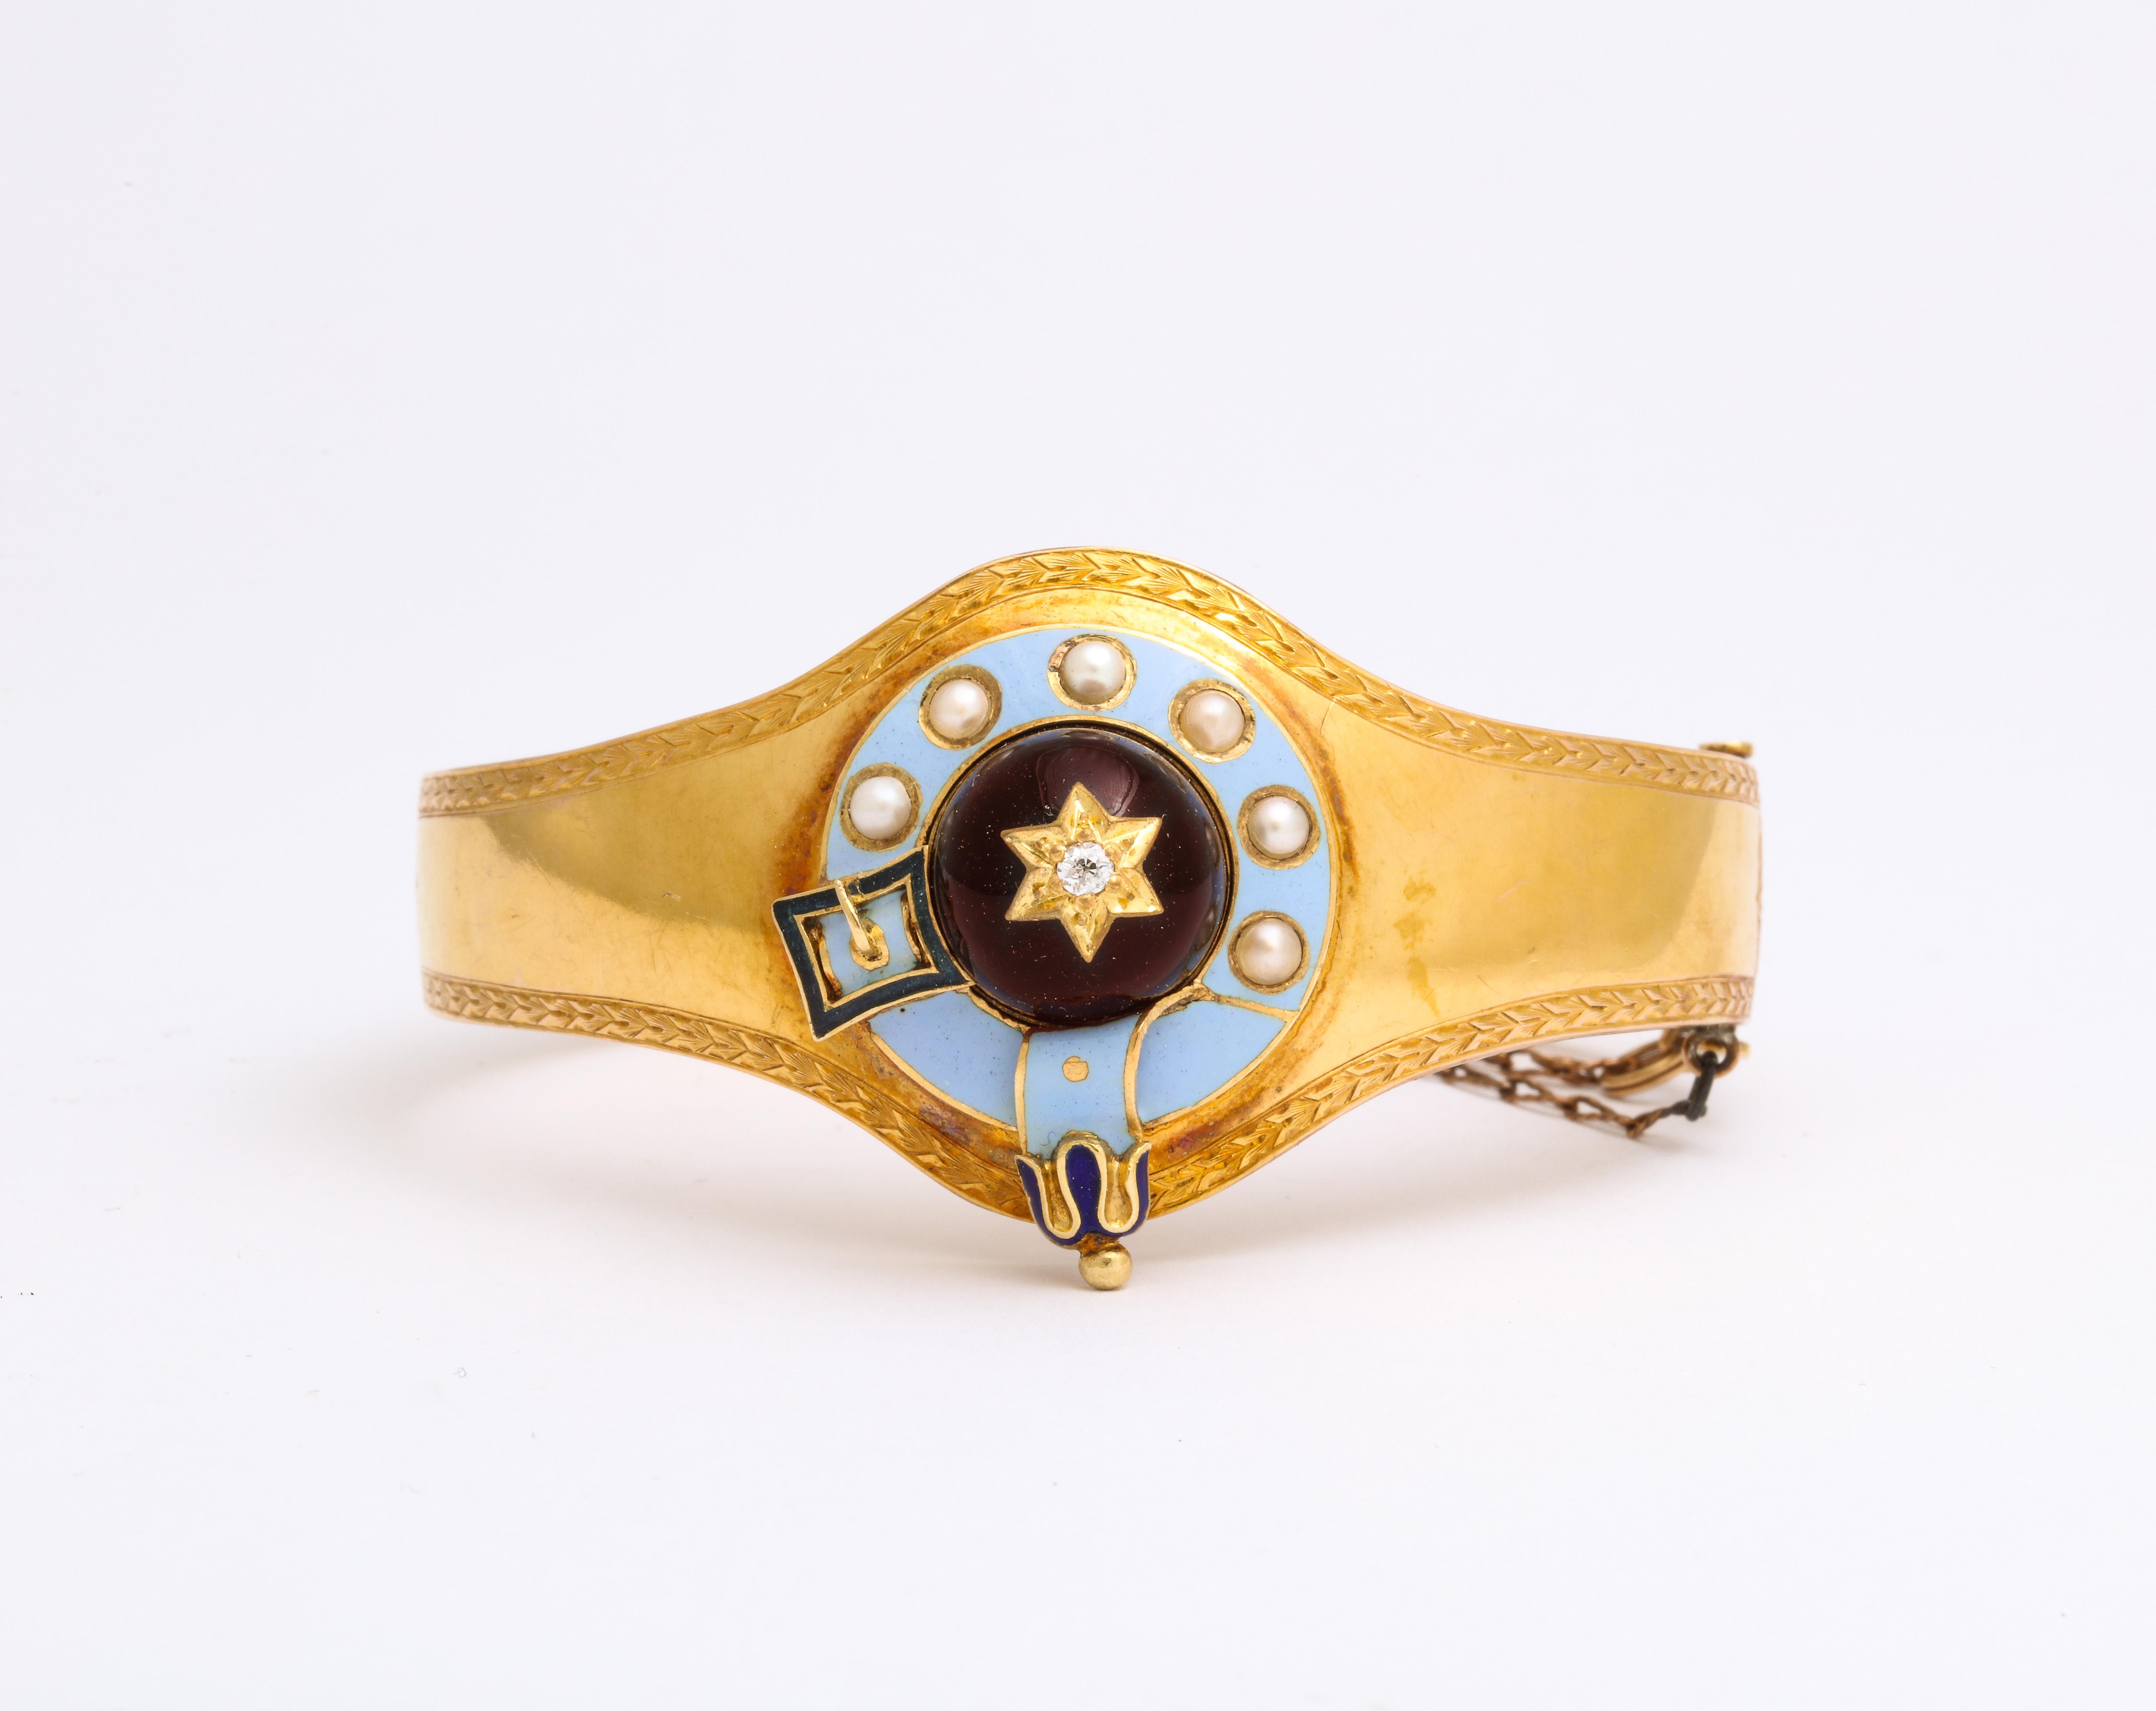 A Victorian bracelet in 15 Kt gold has a large dome cabochon garnet in the center that is set with a gold star and small diamond. A border of light blue enamel surrounds the garnet and that is set with natural pearls. A deep blue buckle and strap